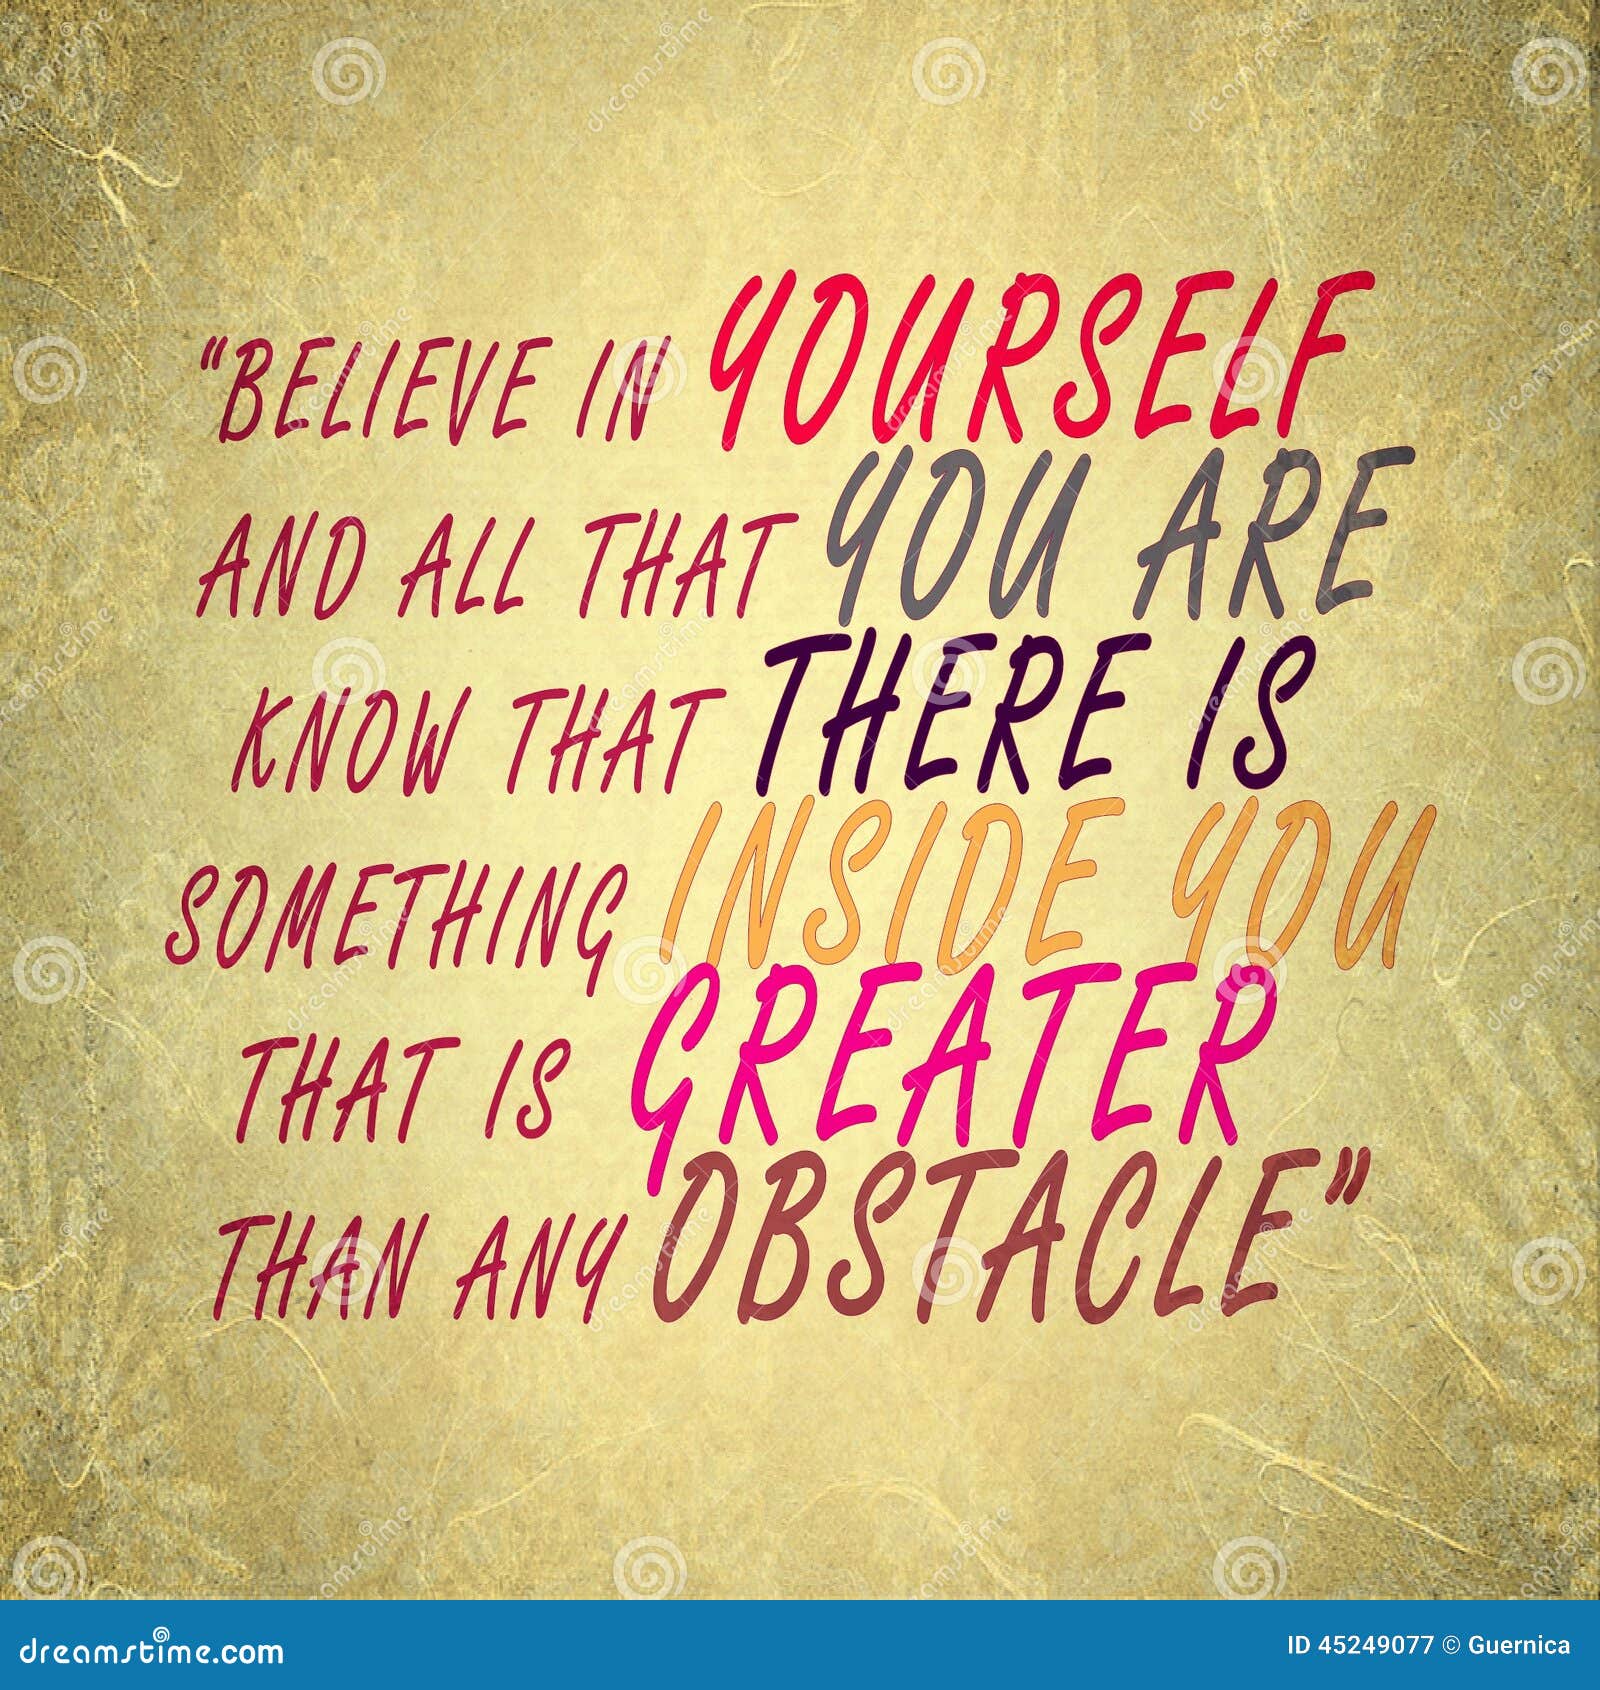 believe in yourself - succeed overcome obstacles - self confidence